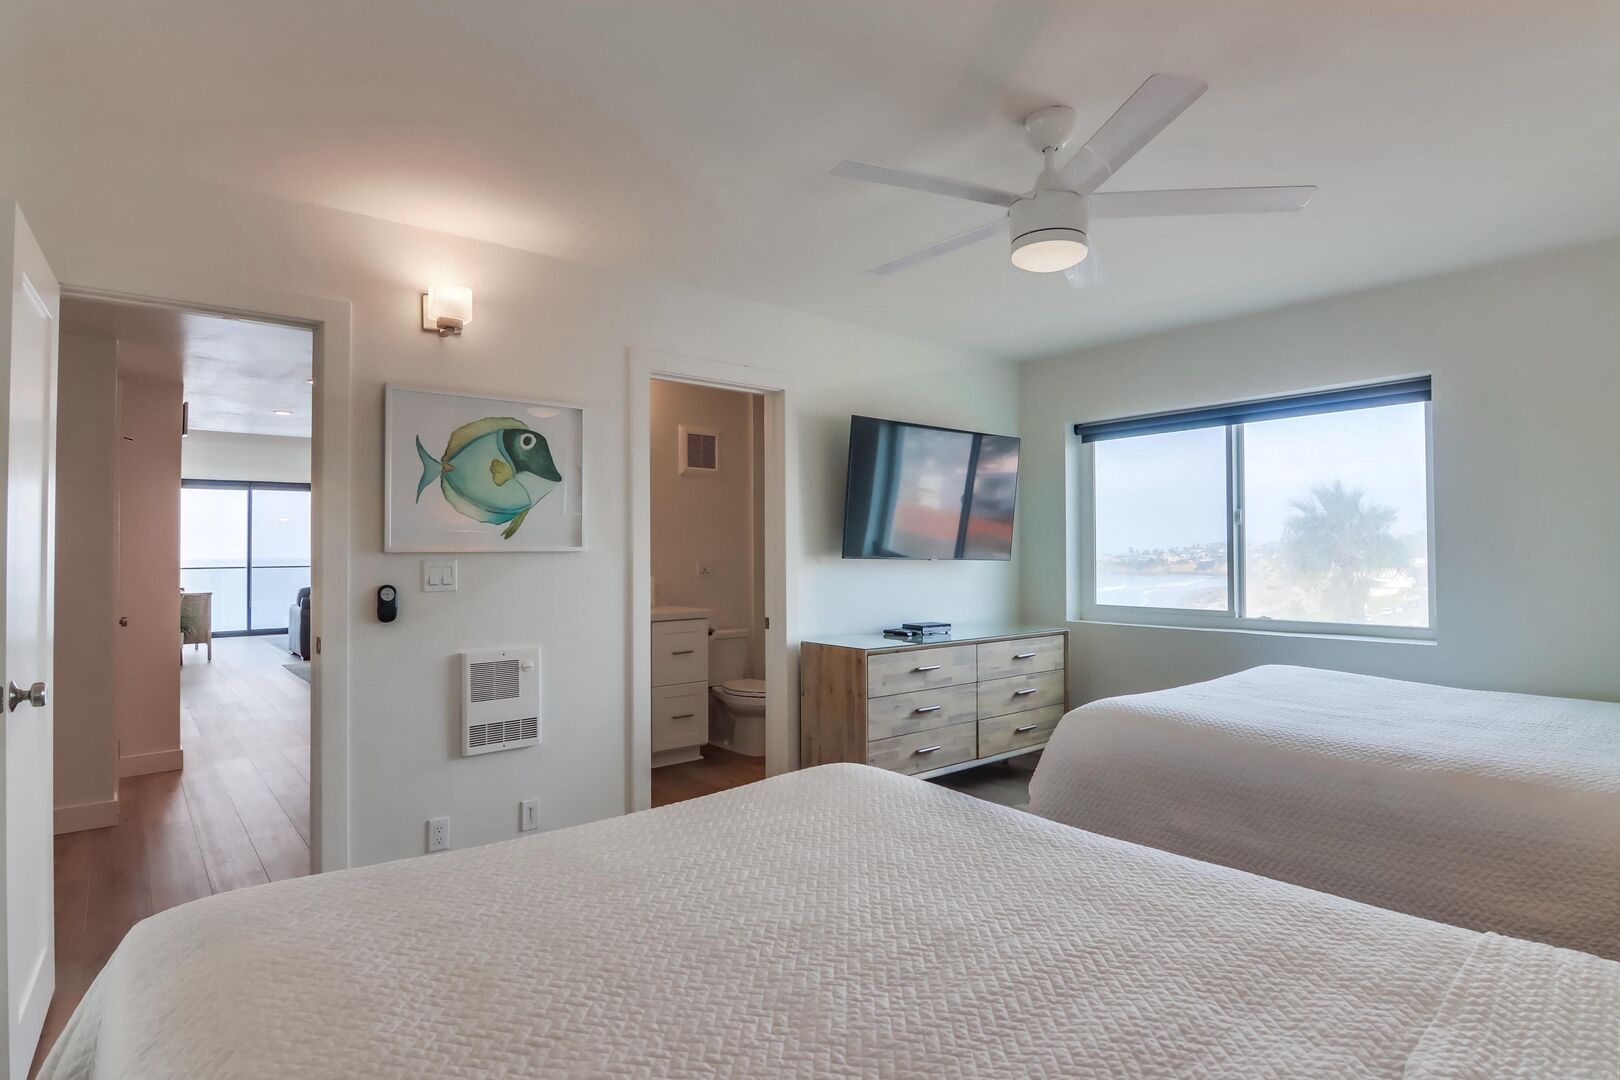 Guest bedroom with overhead light/fan, large, smart TV and in-suite bathroom